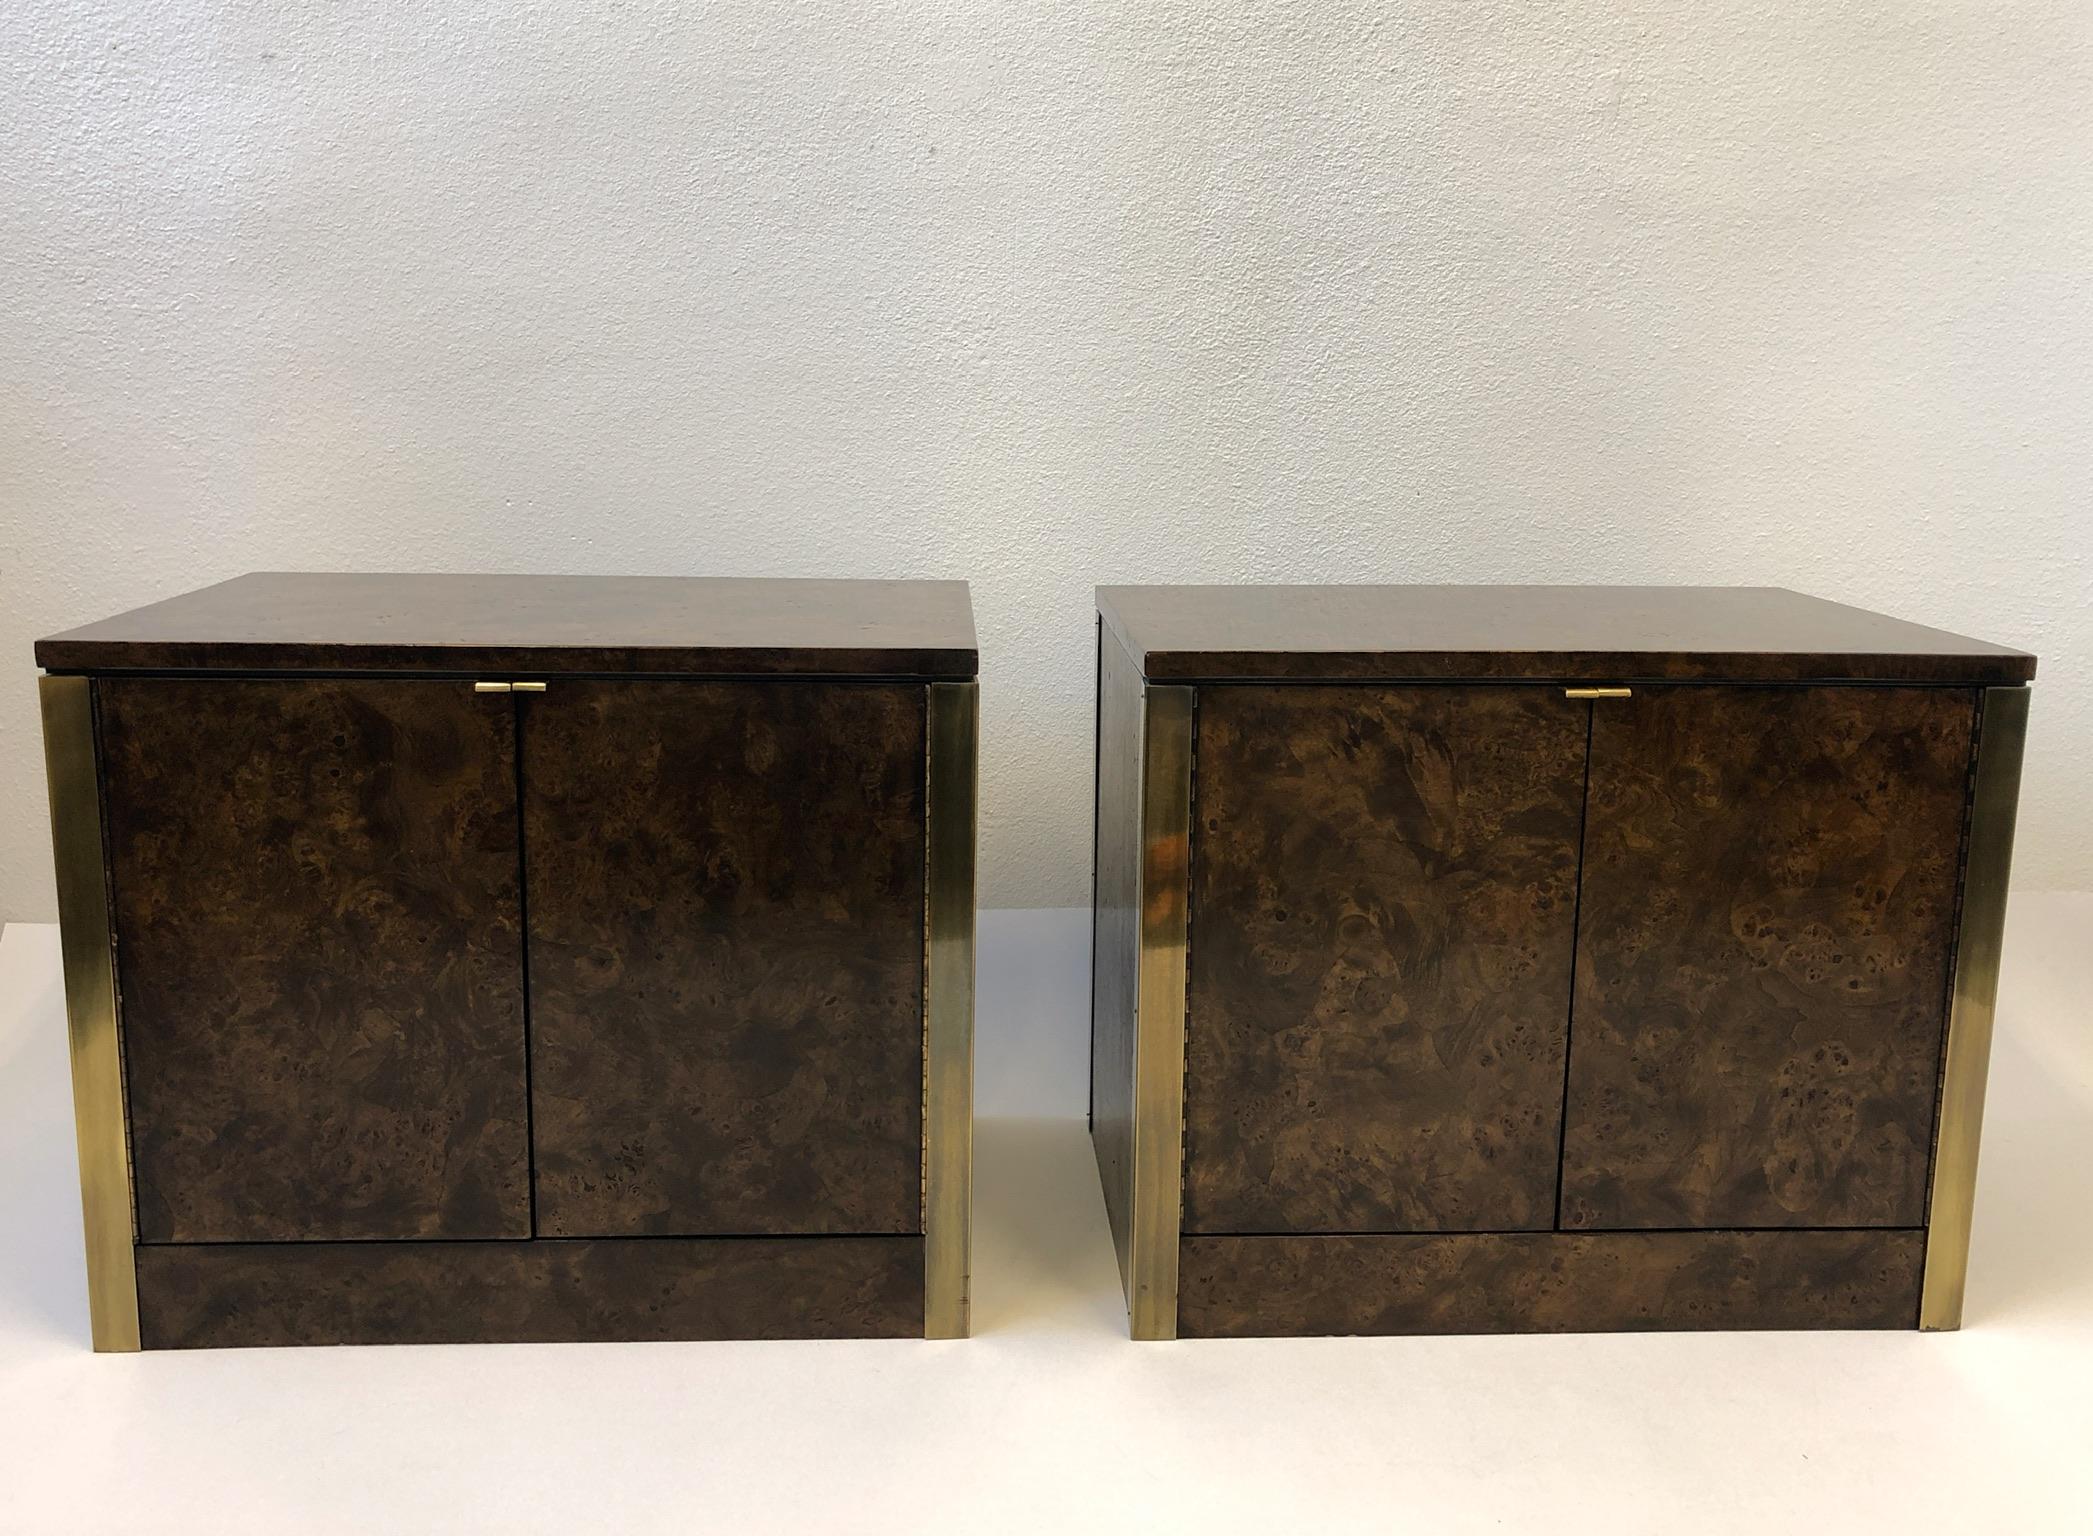 A spectacular pair of 1970s dark brown stain burl wood veneer and aged brass nightstands by Mastercraft. Each nightstand have an adjustable 10” deep shelf inside. This are in beautiful vintage condition. 

Dimensions: 28” wide 23” high 18” deep.